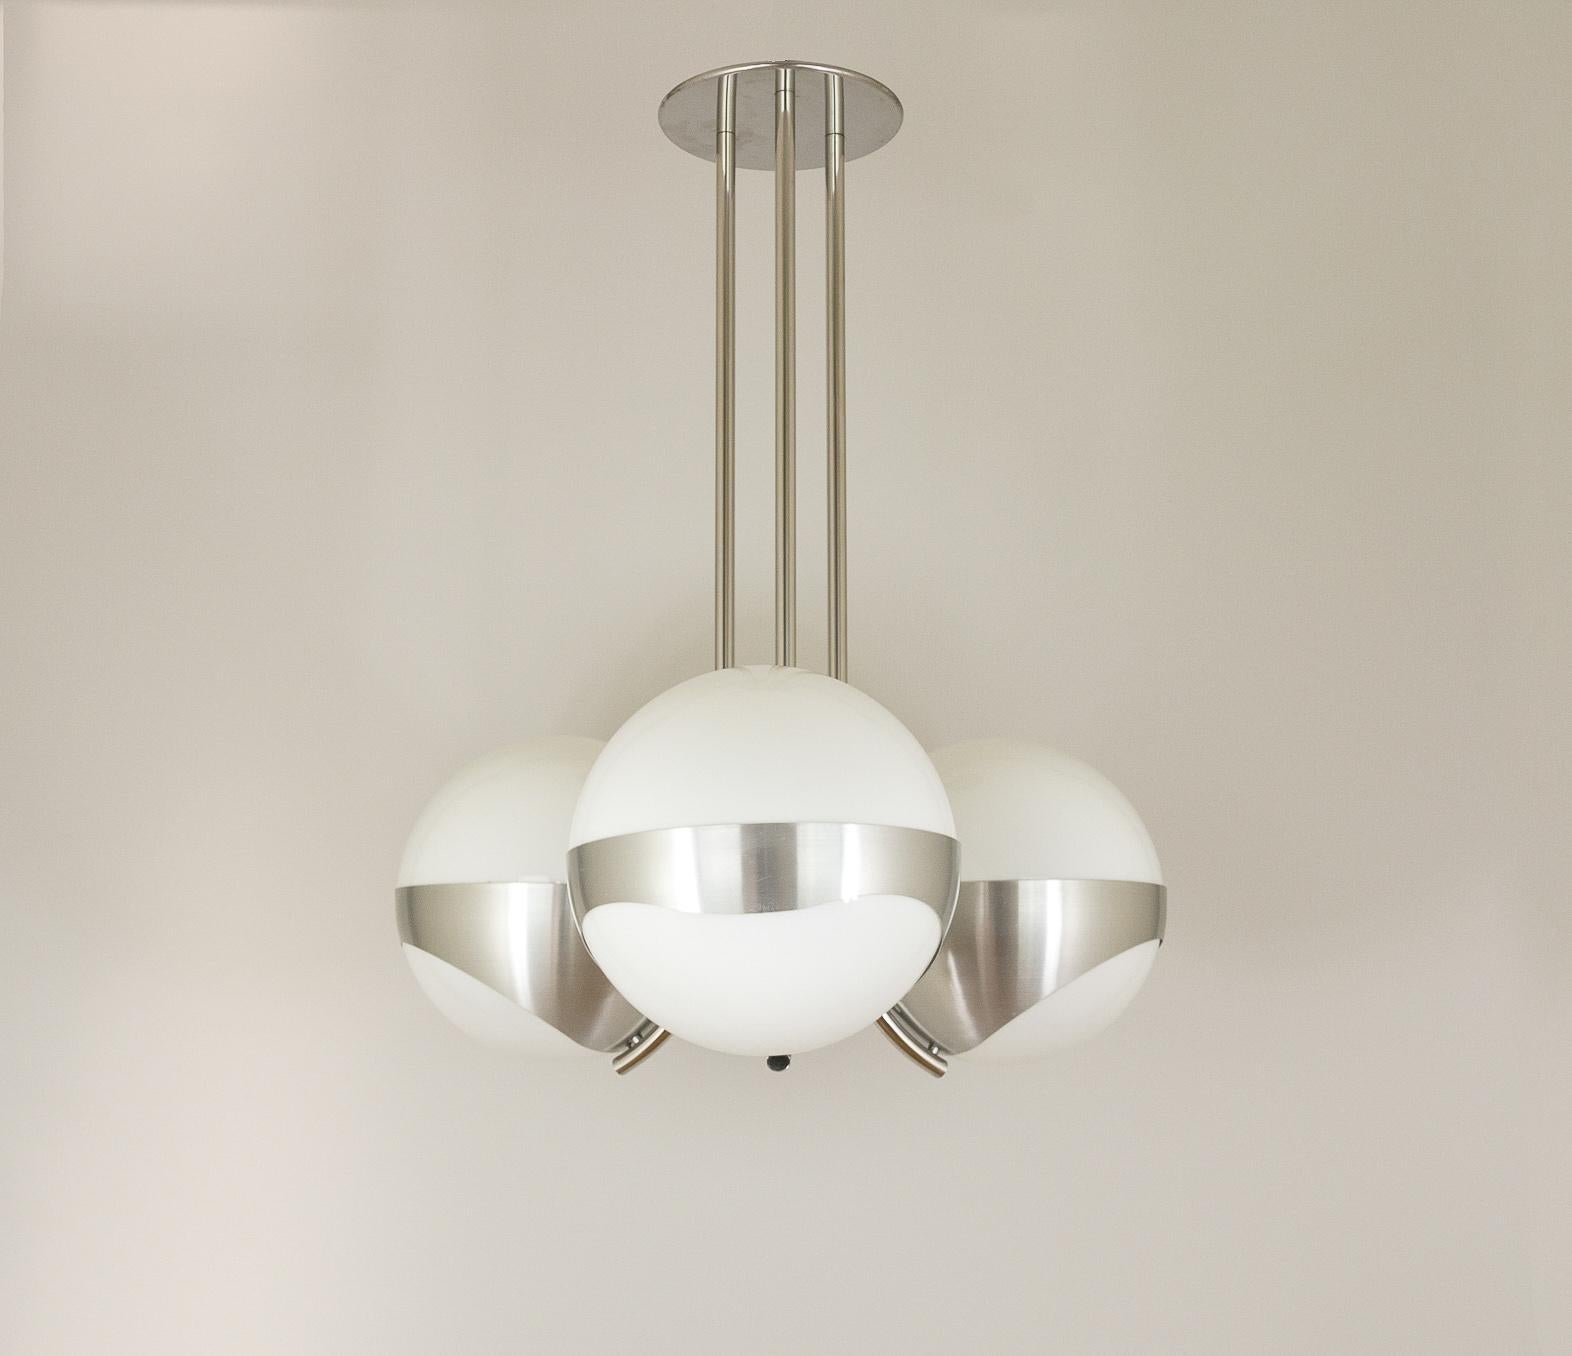 Striking chandelier with three large white glass globes nestled in an anodized metal frame. Designed and manufactured in Italy by Lamperti in the 1970s.

The condition of the lamp is good, with only some minor scratches on the frame.

